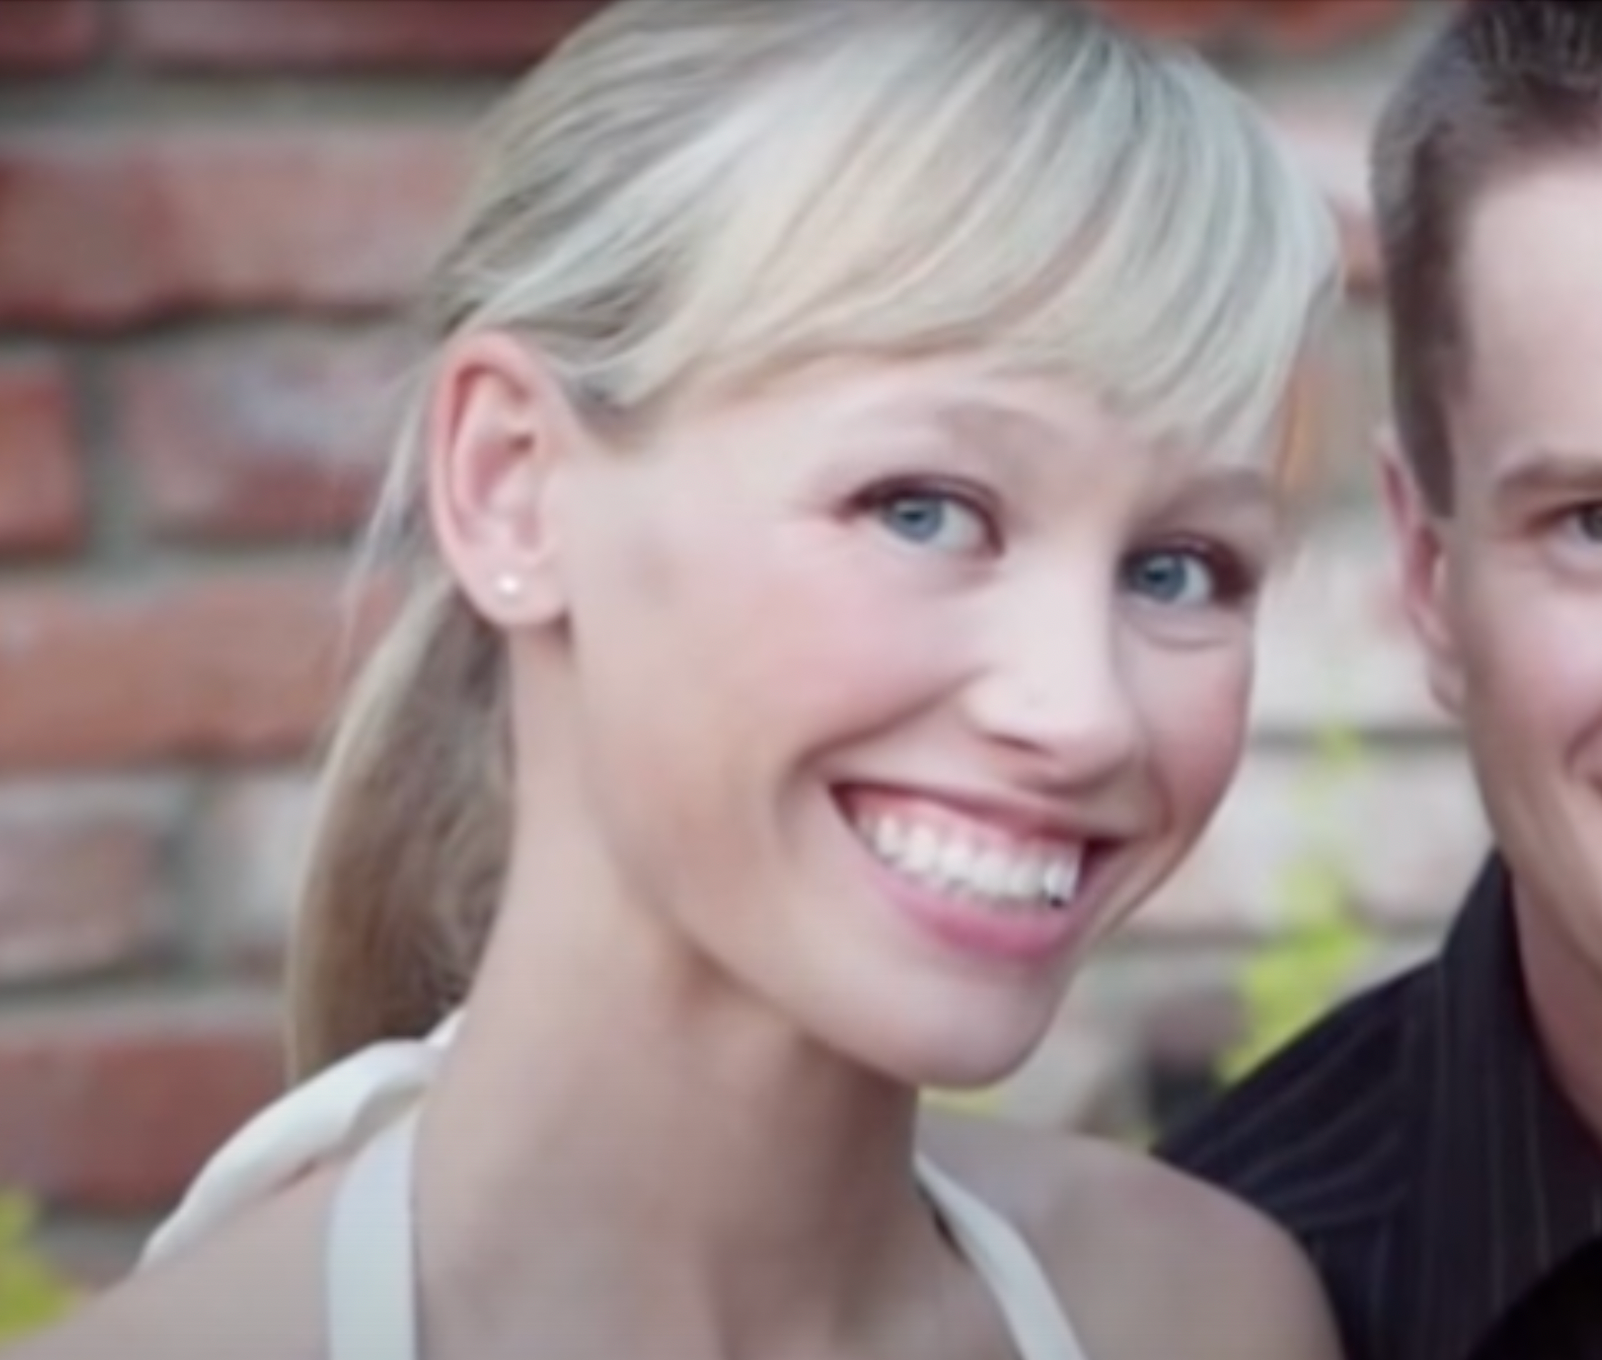 Sherri Papini is facing charges for fabricating her own abduction in 2016